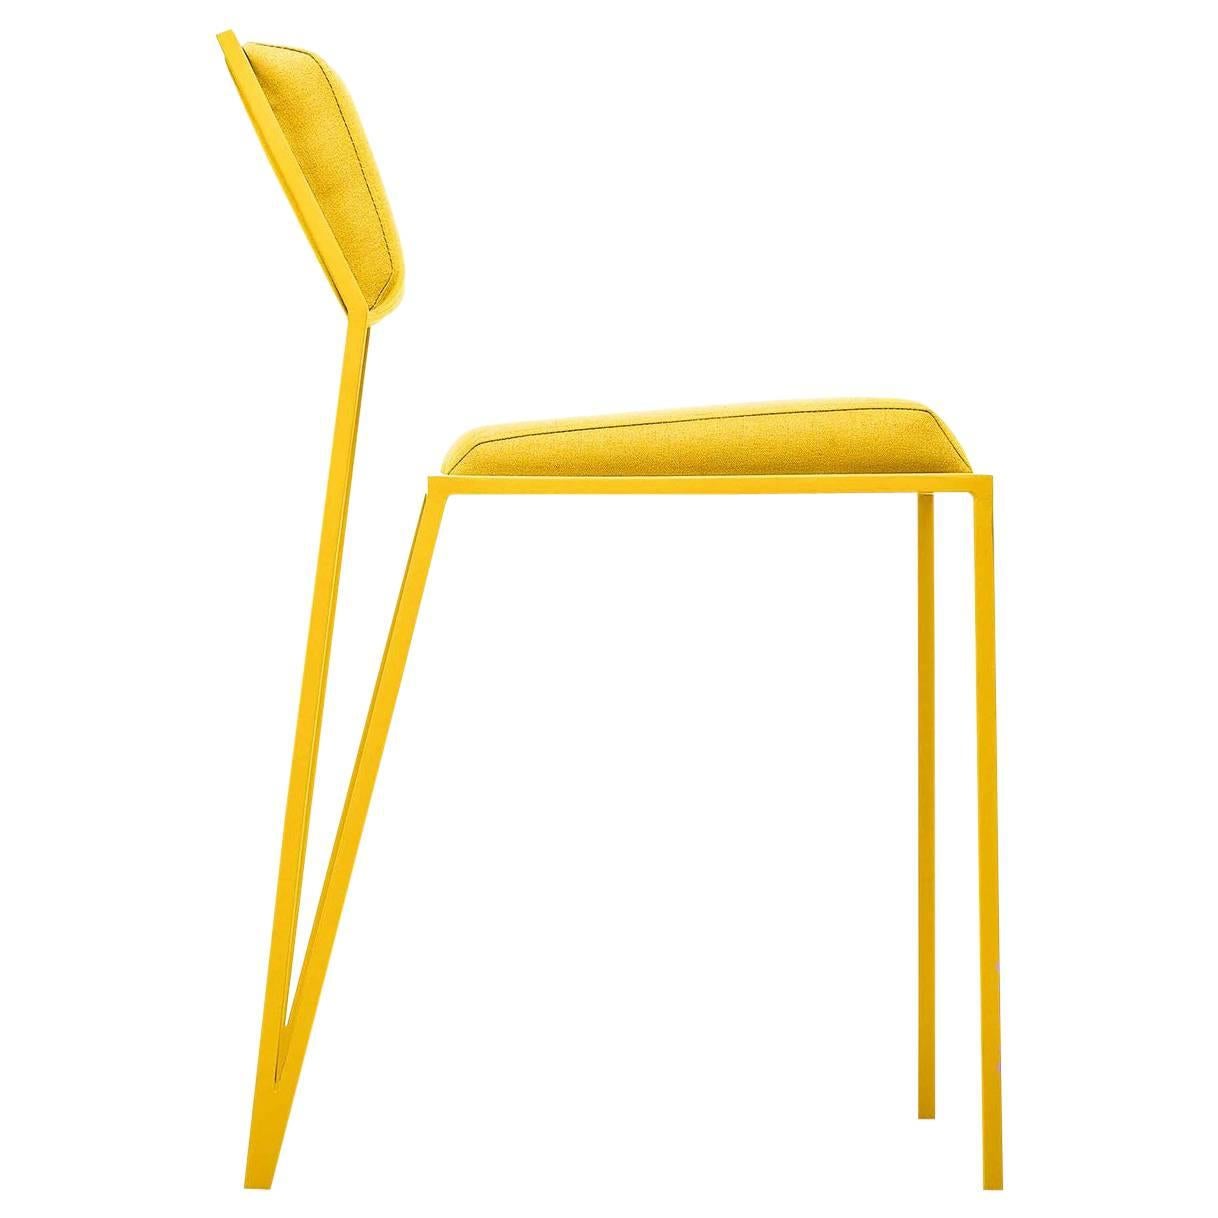 Minimalist Chair , Brazilian Contemporary Style by Tiago Curioni